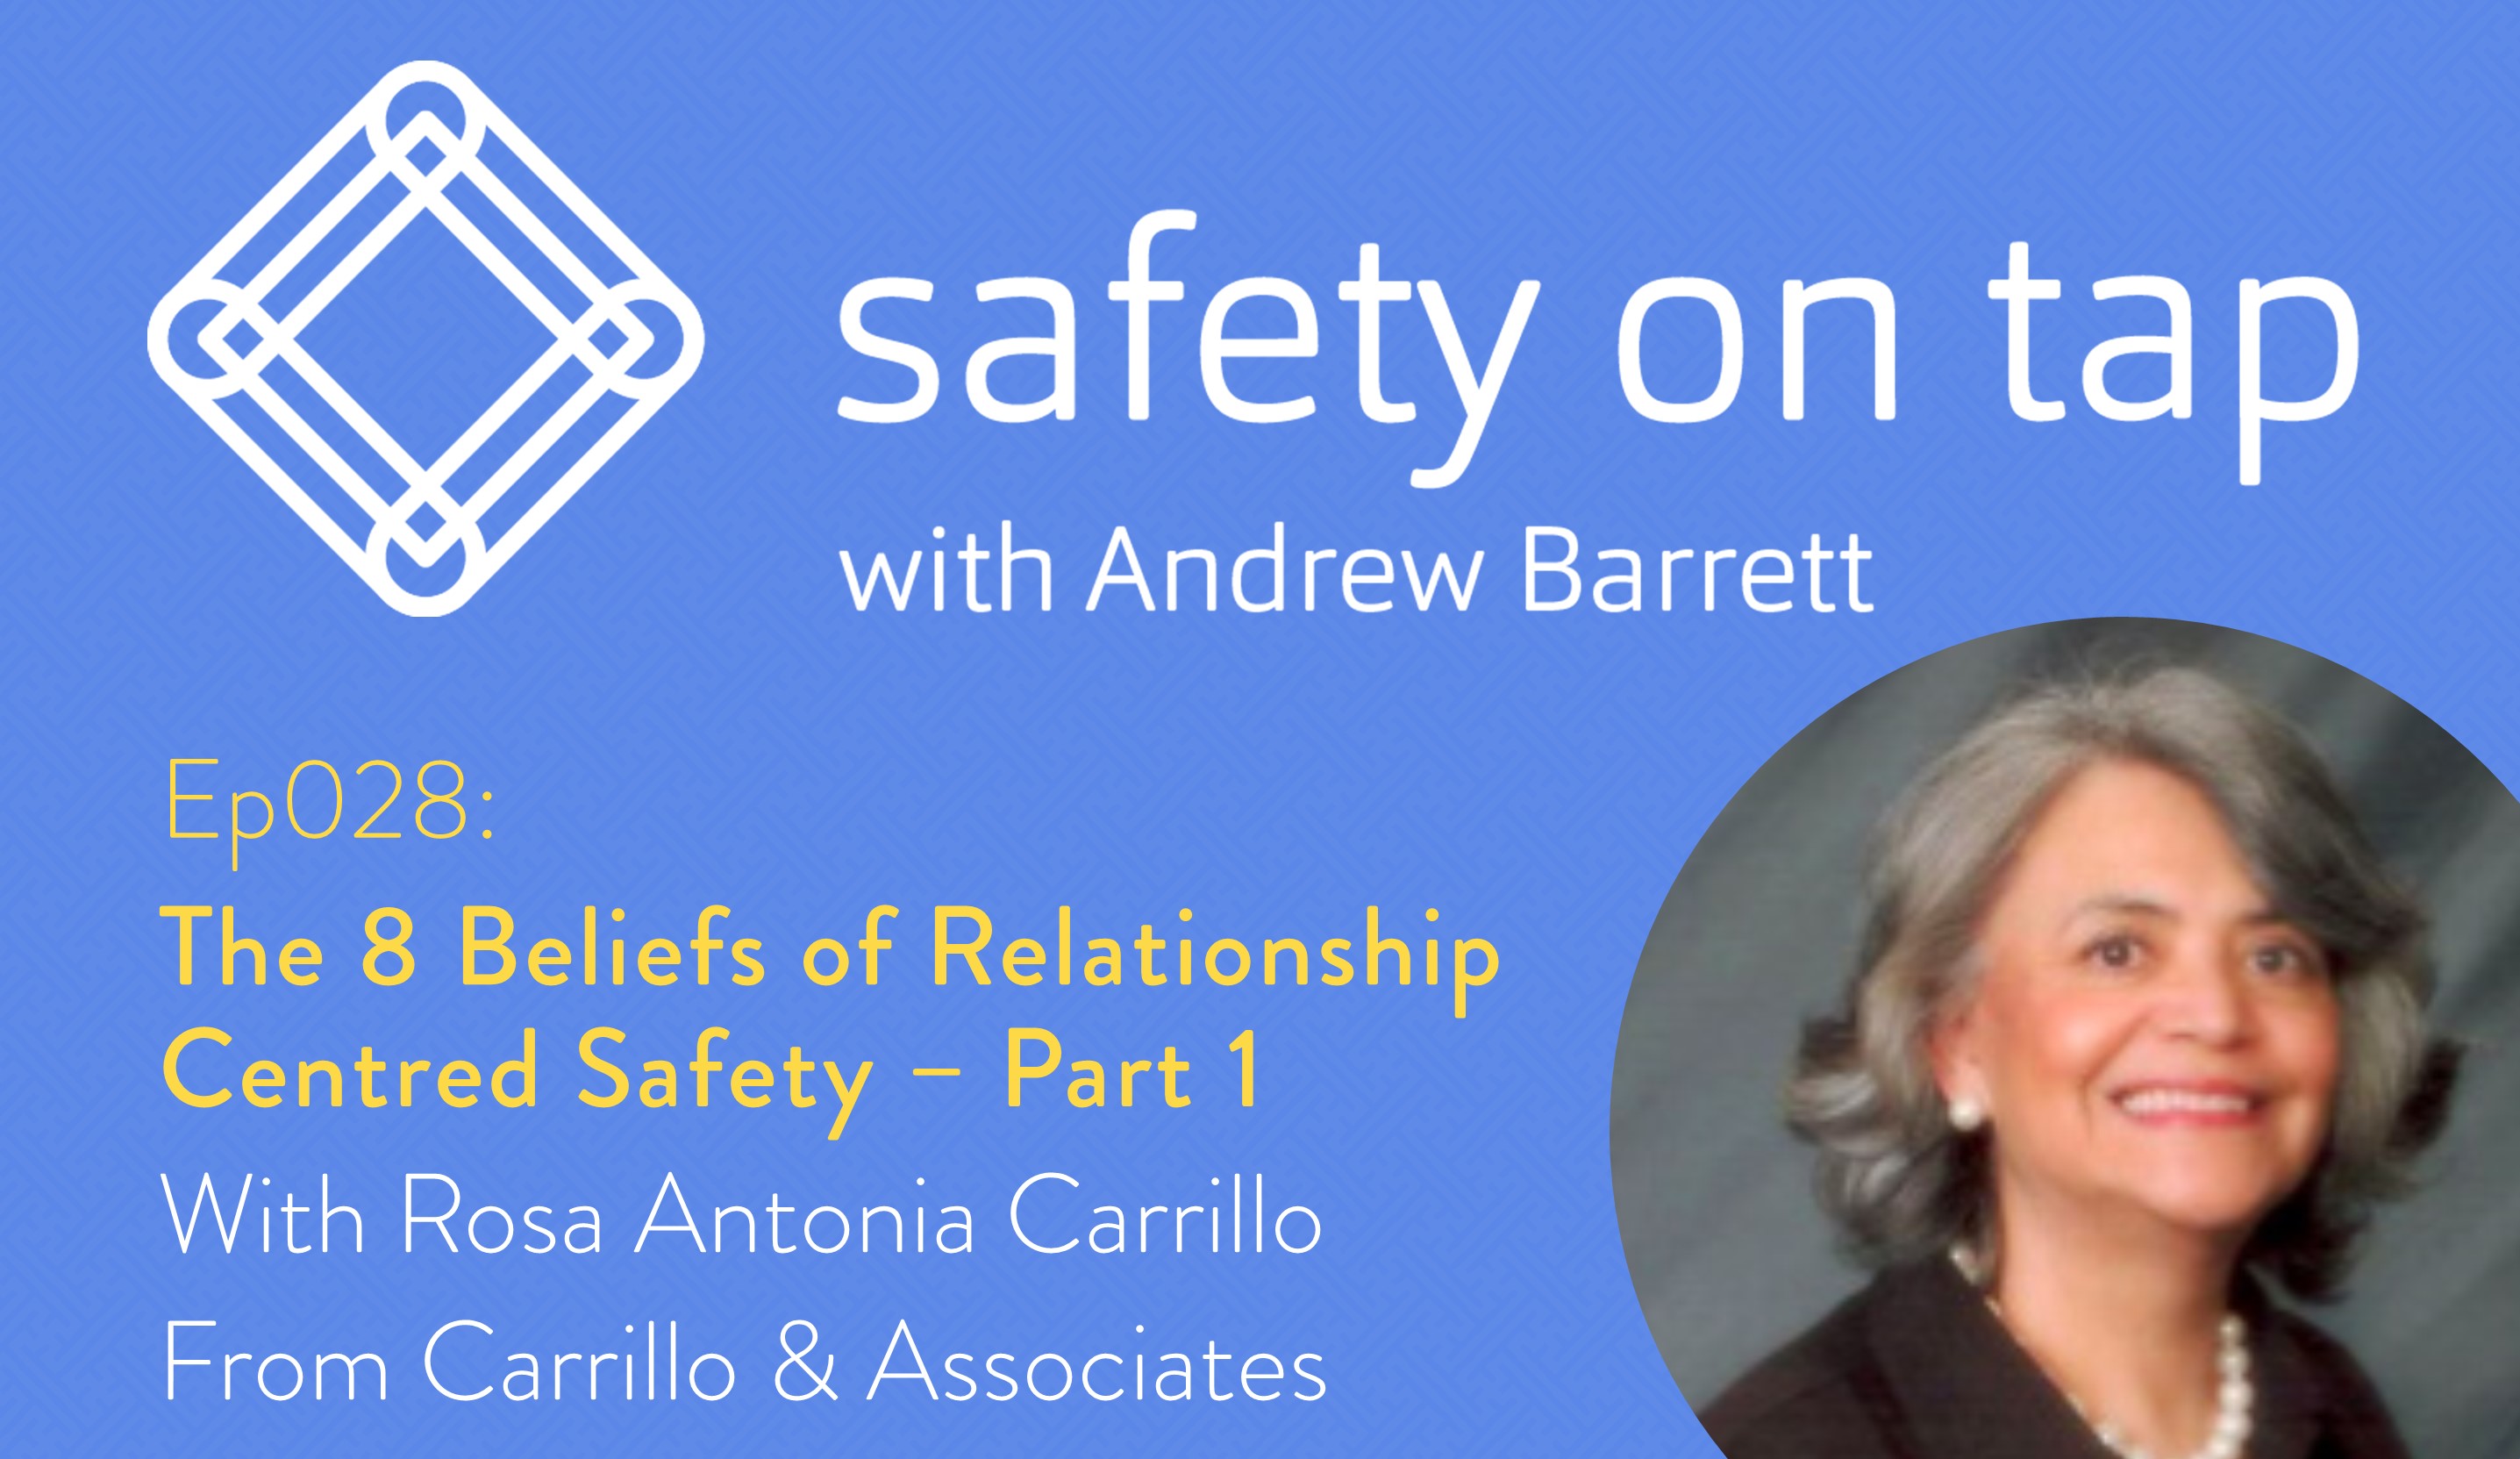 Ep28: The 8 Beliefs of Relationship Centered Safety Part 1, with Rosa Antonia Carrillo